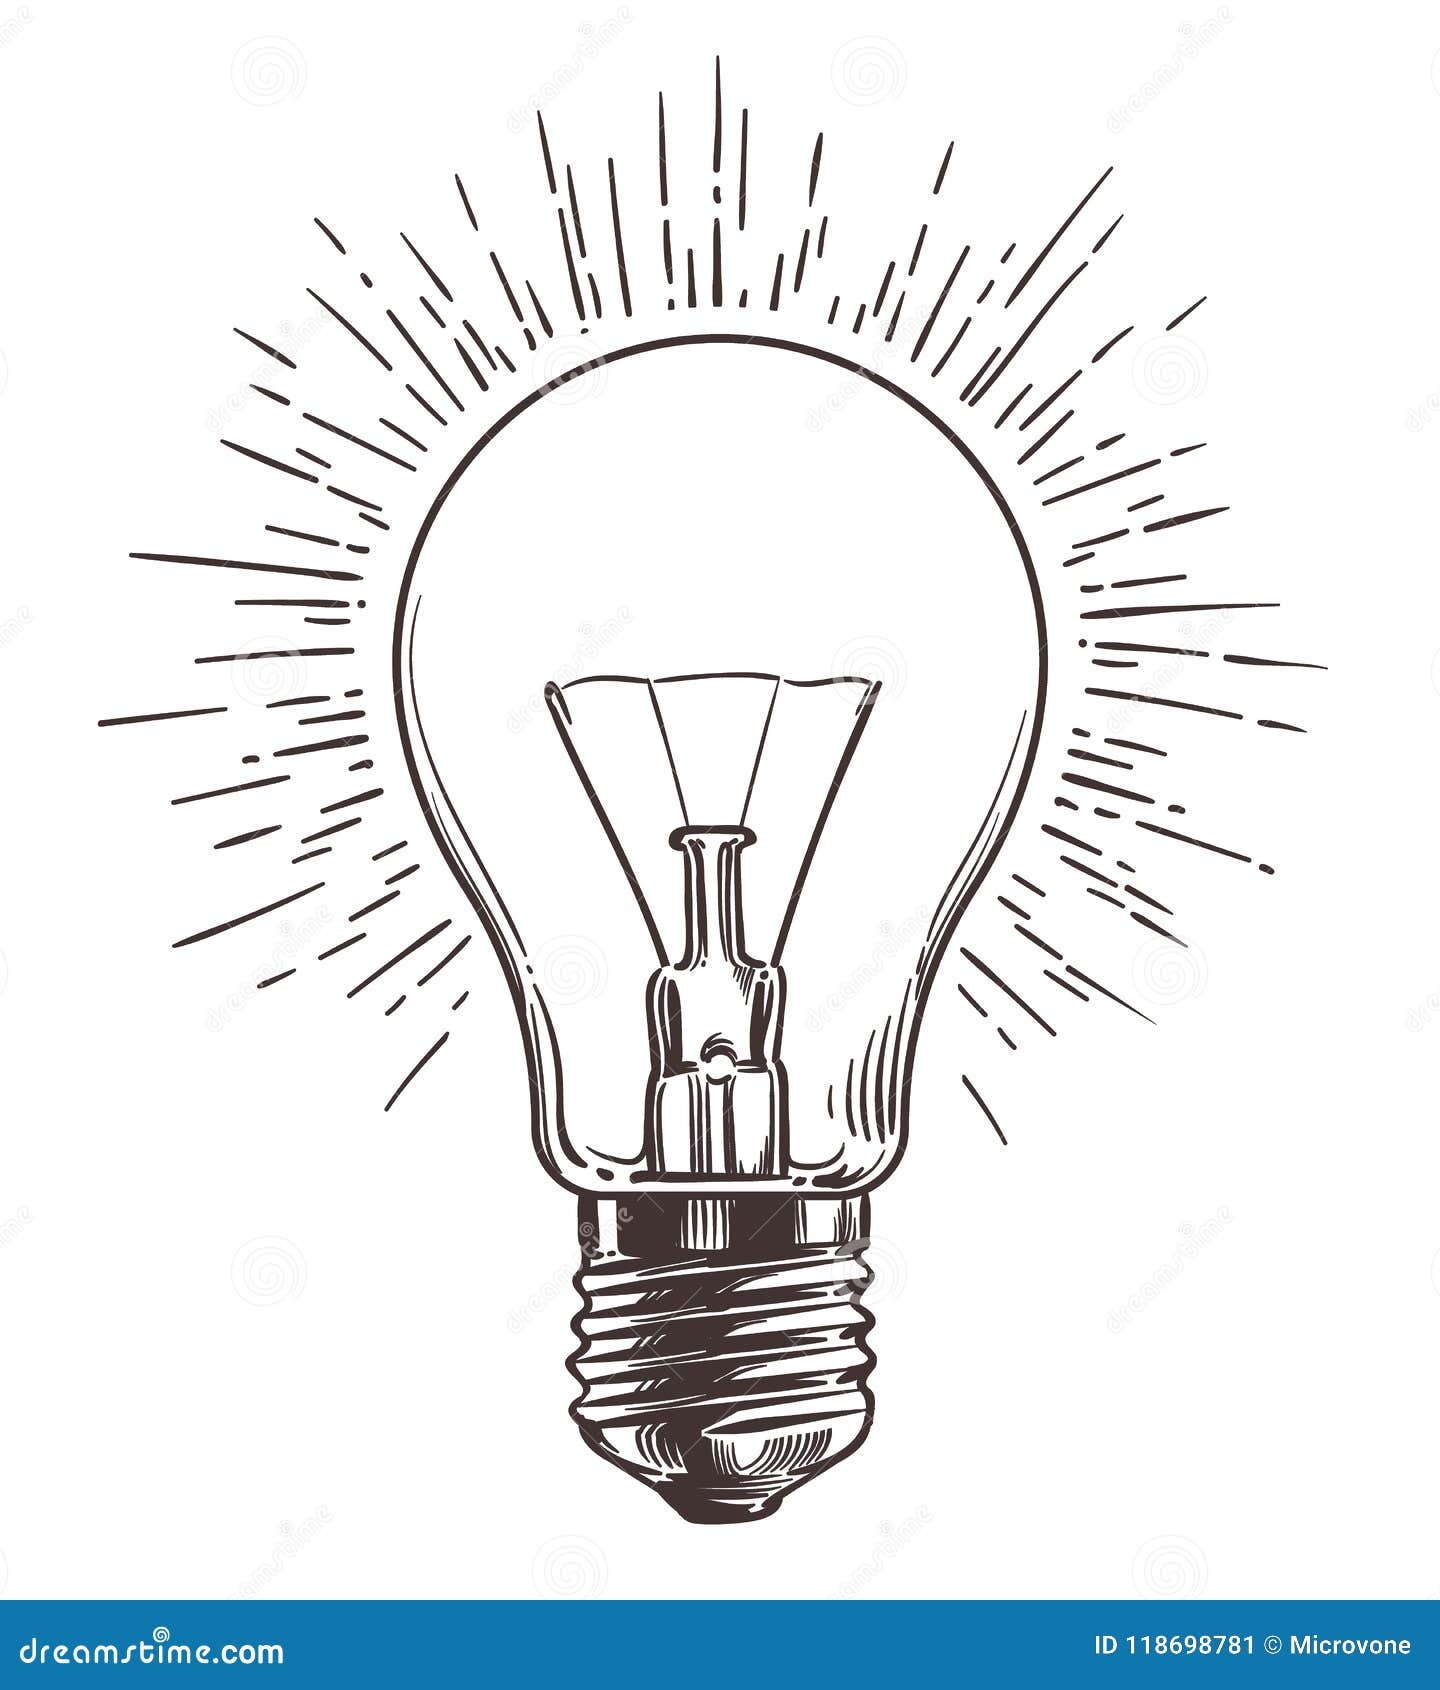 vintage light bulb in engraving style. hand drawn retro lightbulb with illumination for idea concept. 